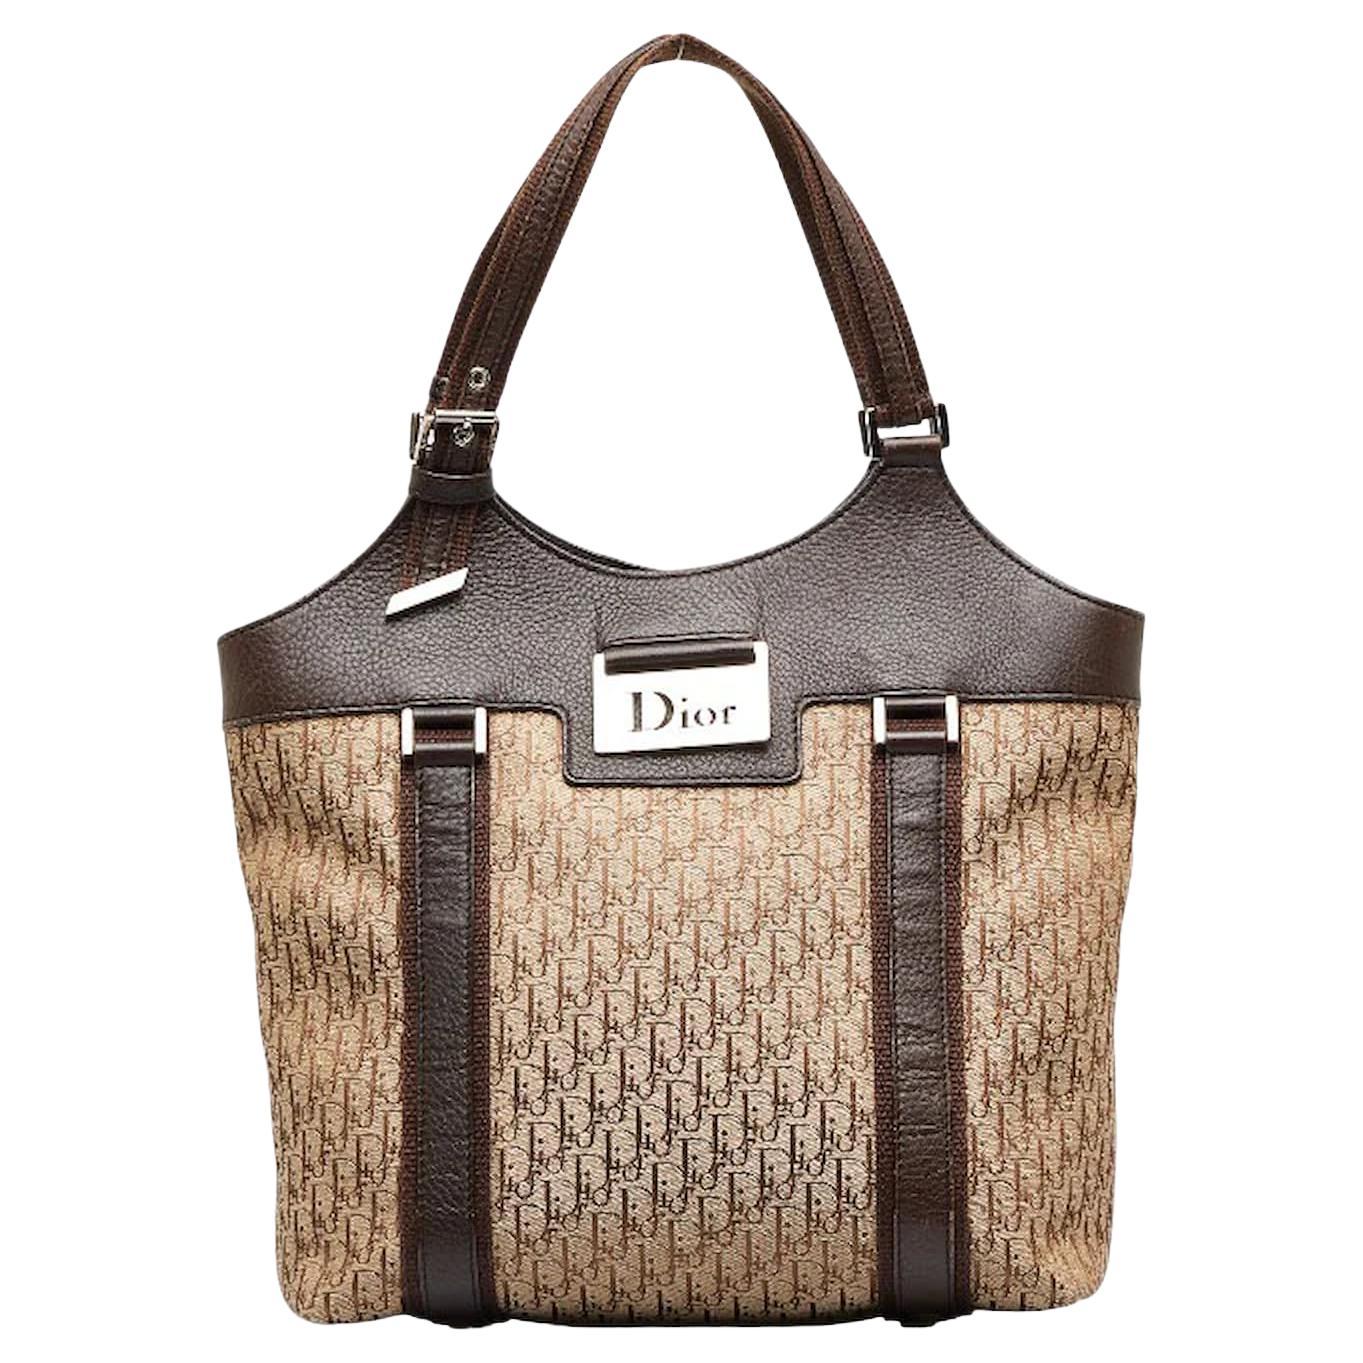 Christian Dior & John Galliano 2007 Street Chic Tote Bag with Trotter Pattern For Sale